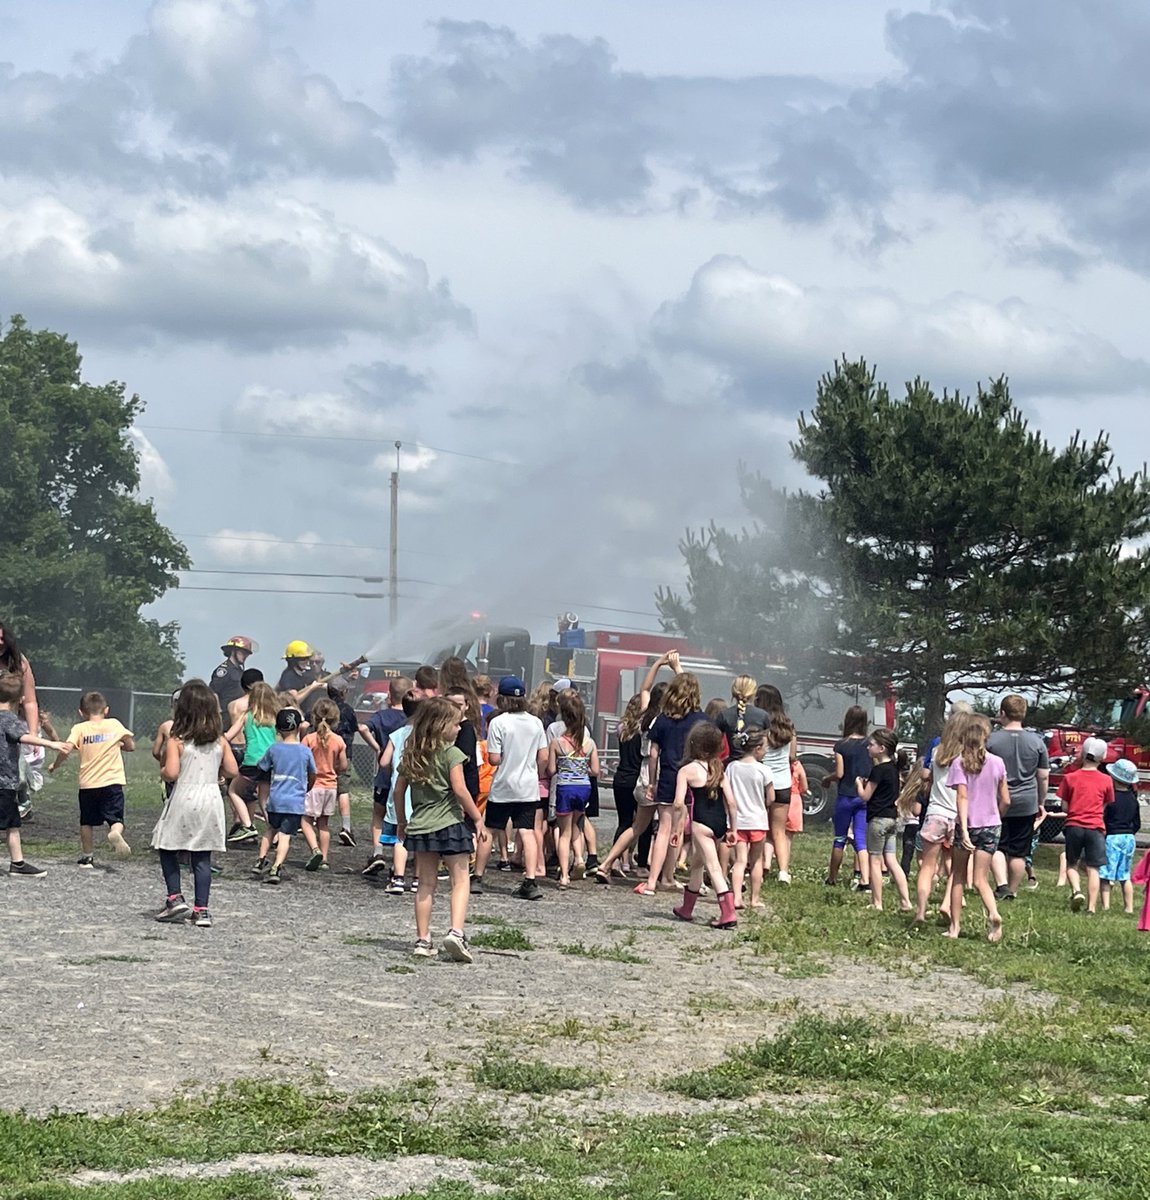 We were very happy this week to celebrate the end of the school year with our local schools. Stay safe and have a great summer! @alcdsb_stpe @NewburghPS_LDSB @TES_LDSB @EPS_LDSB